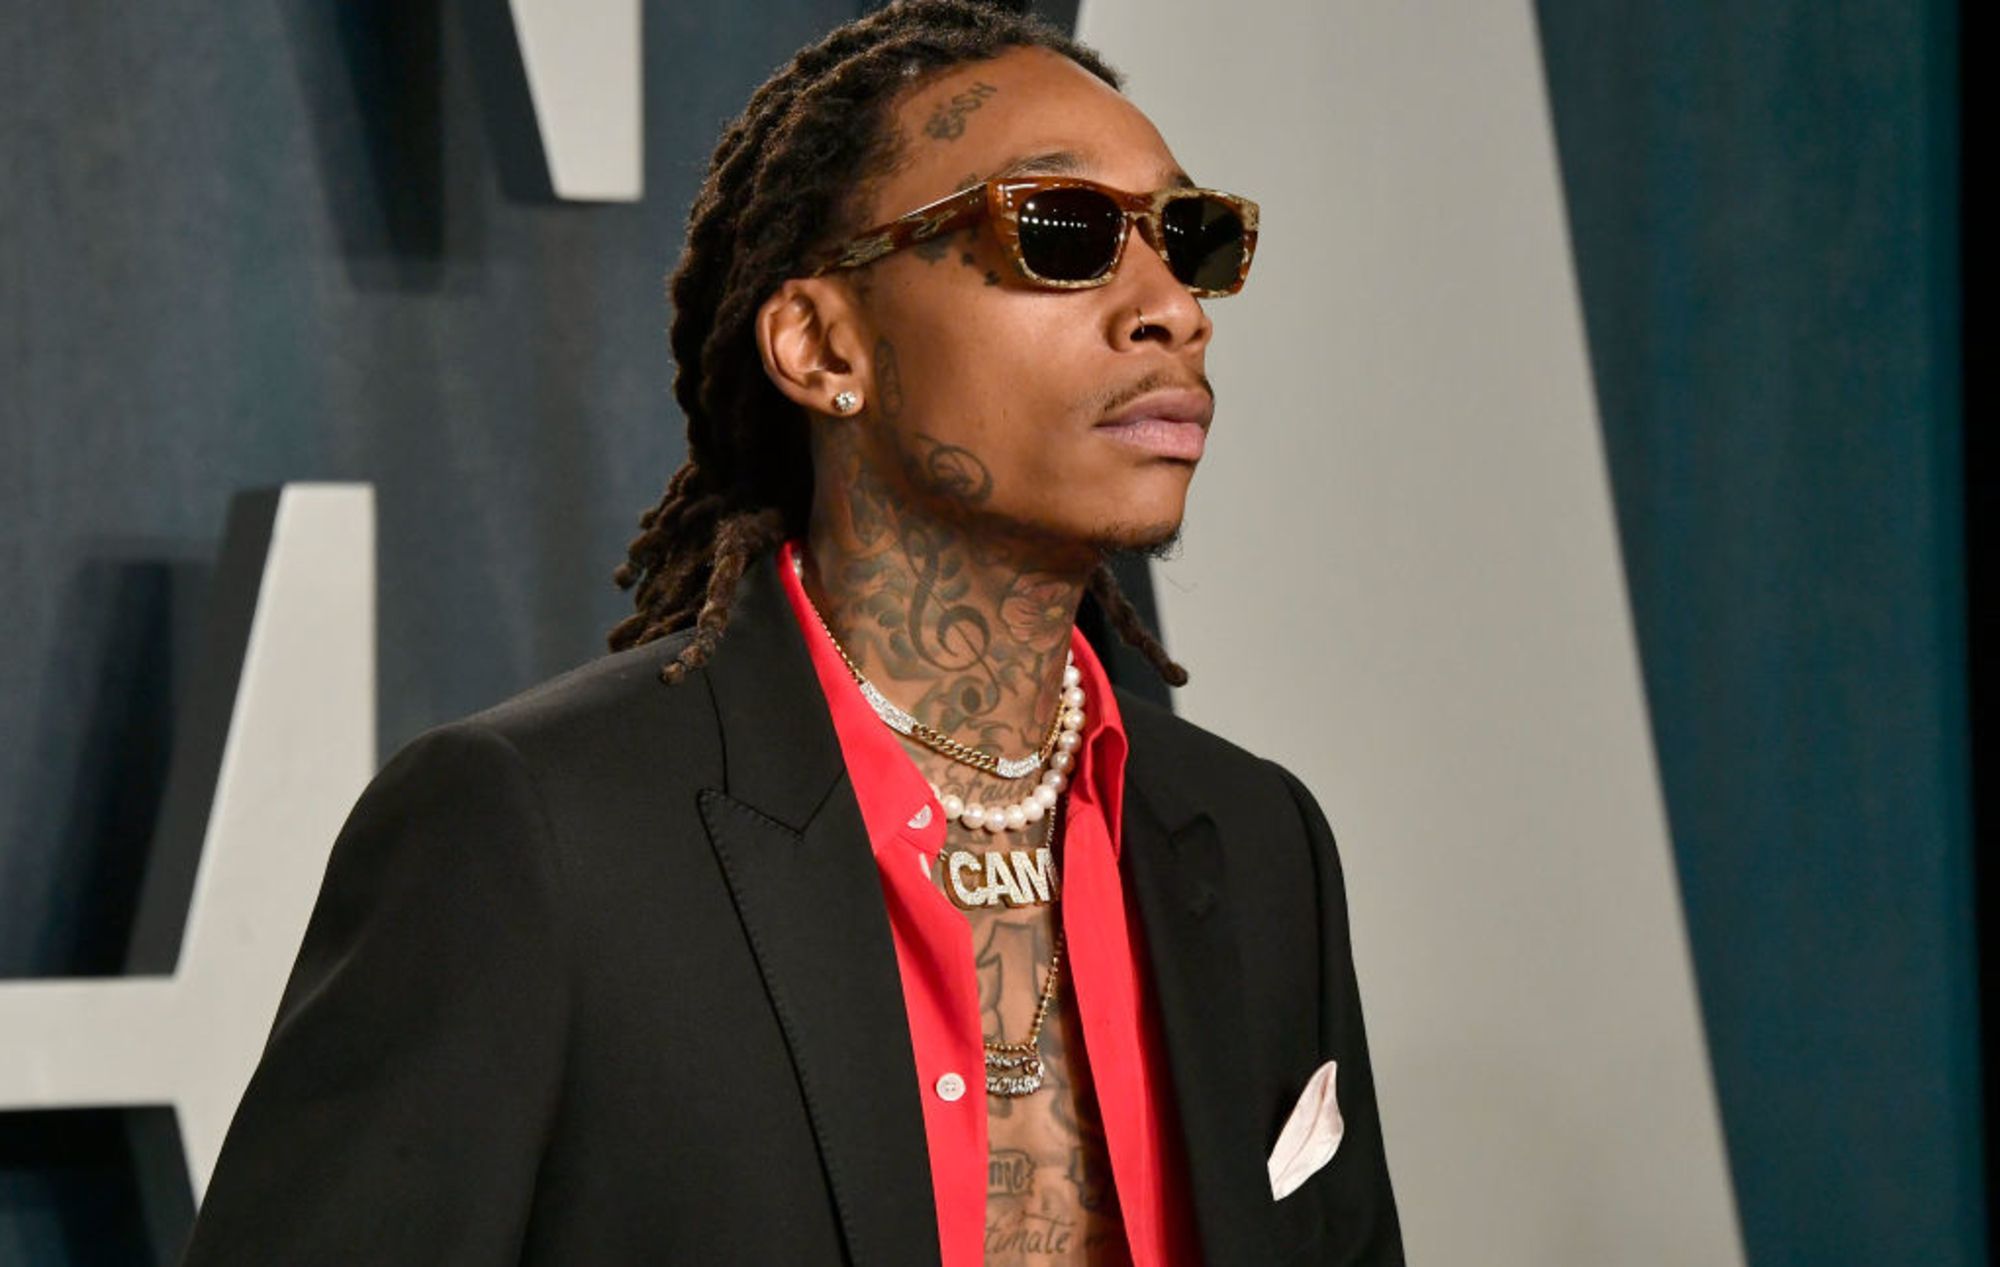 Wiz Khalifa encourages people to take the 'Top Down' on new song